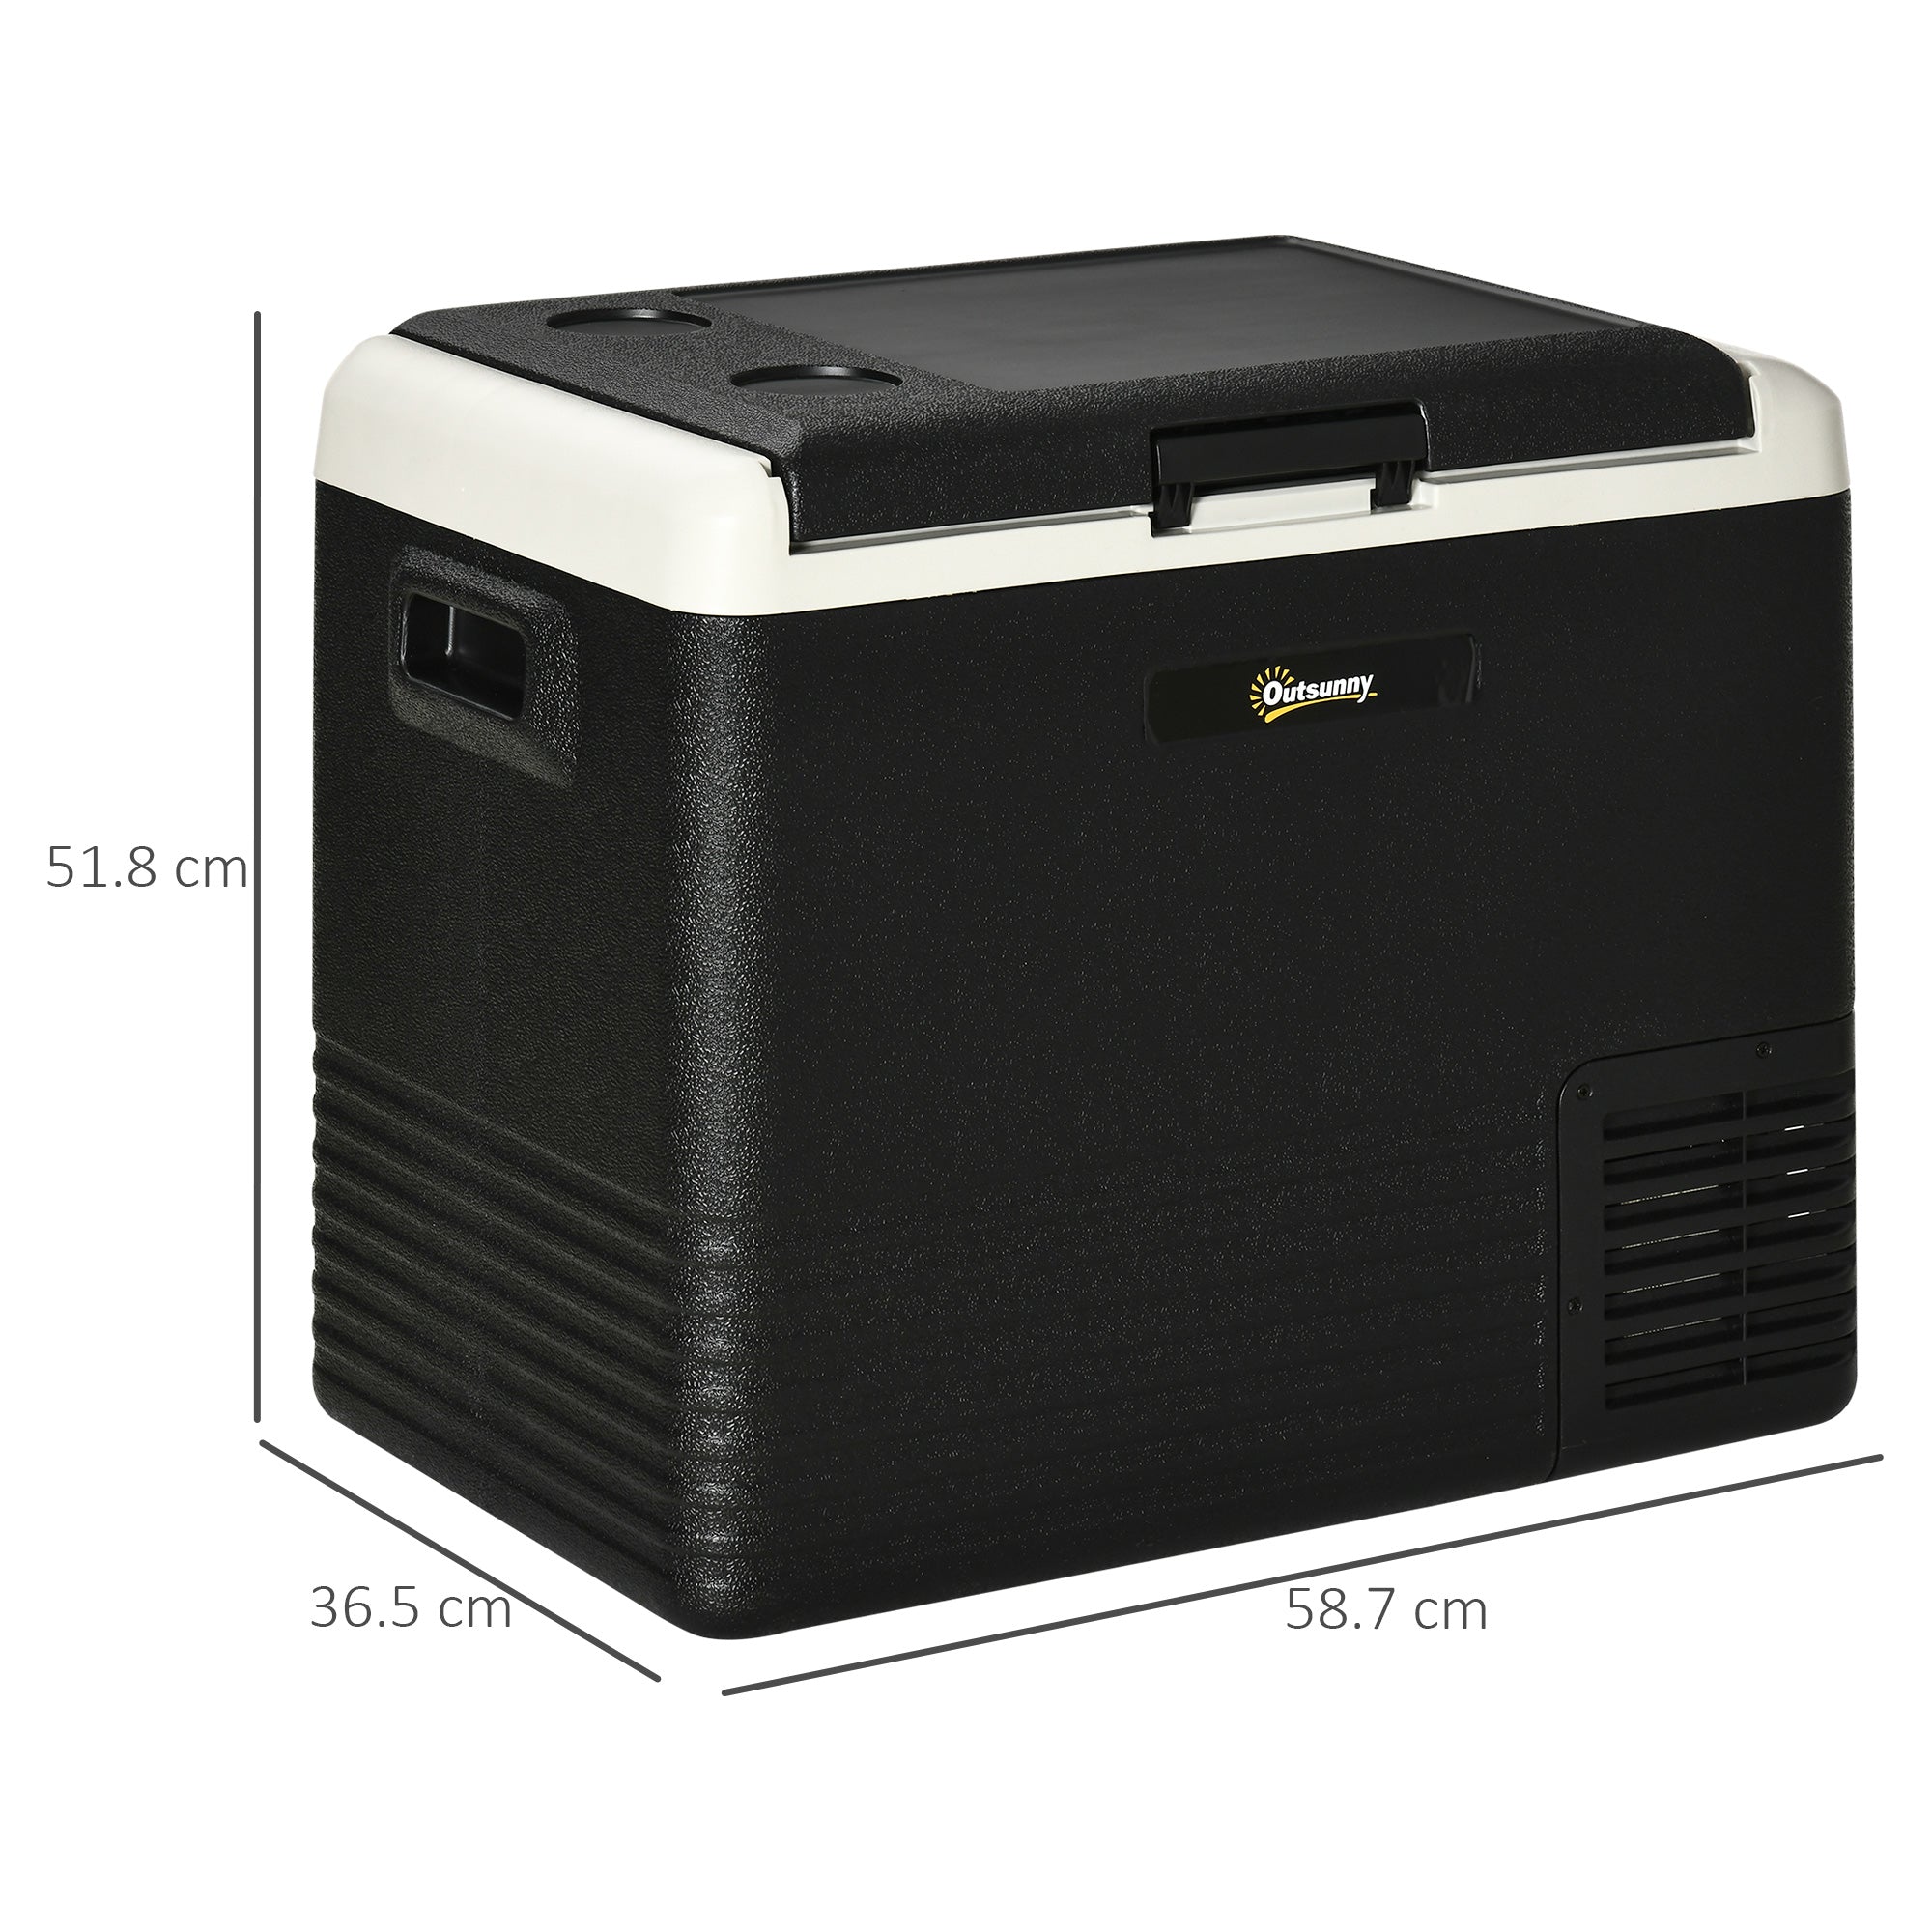 Outsunny 50L Car Refrigerator, Portable Compressor Car Fridge Freezer, Electric Cooler Box with 12/24V DC and 110-240V AC for Camping Down to -20℃ - Inspirely